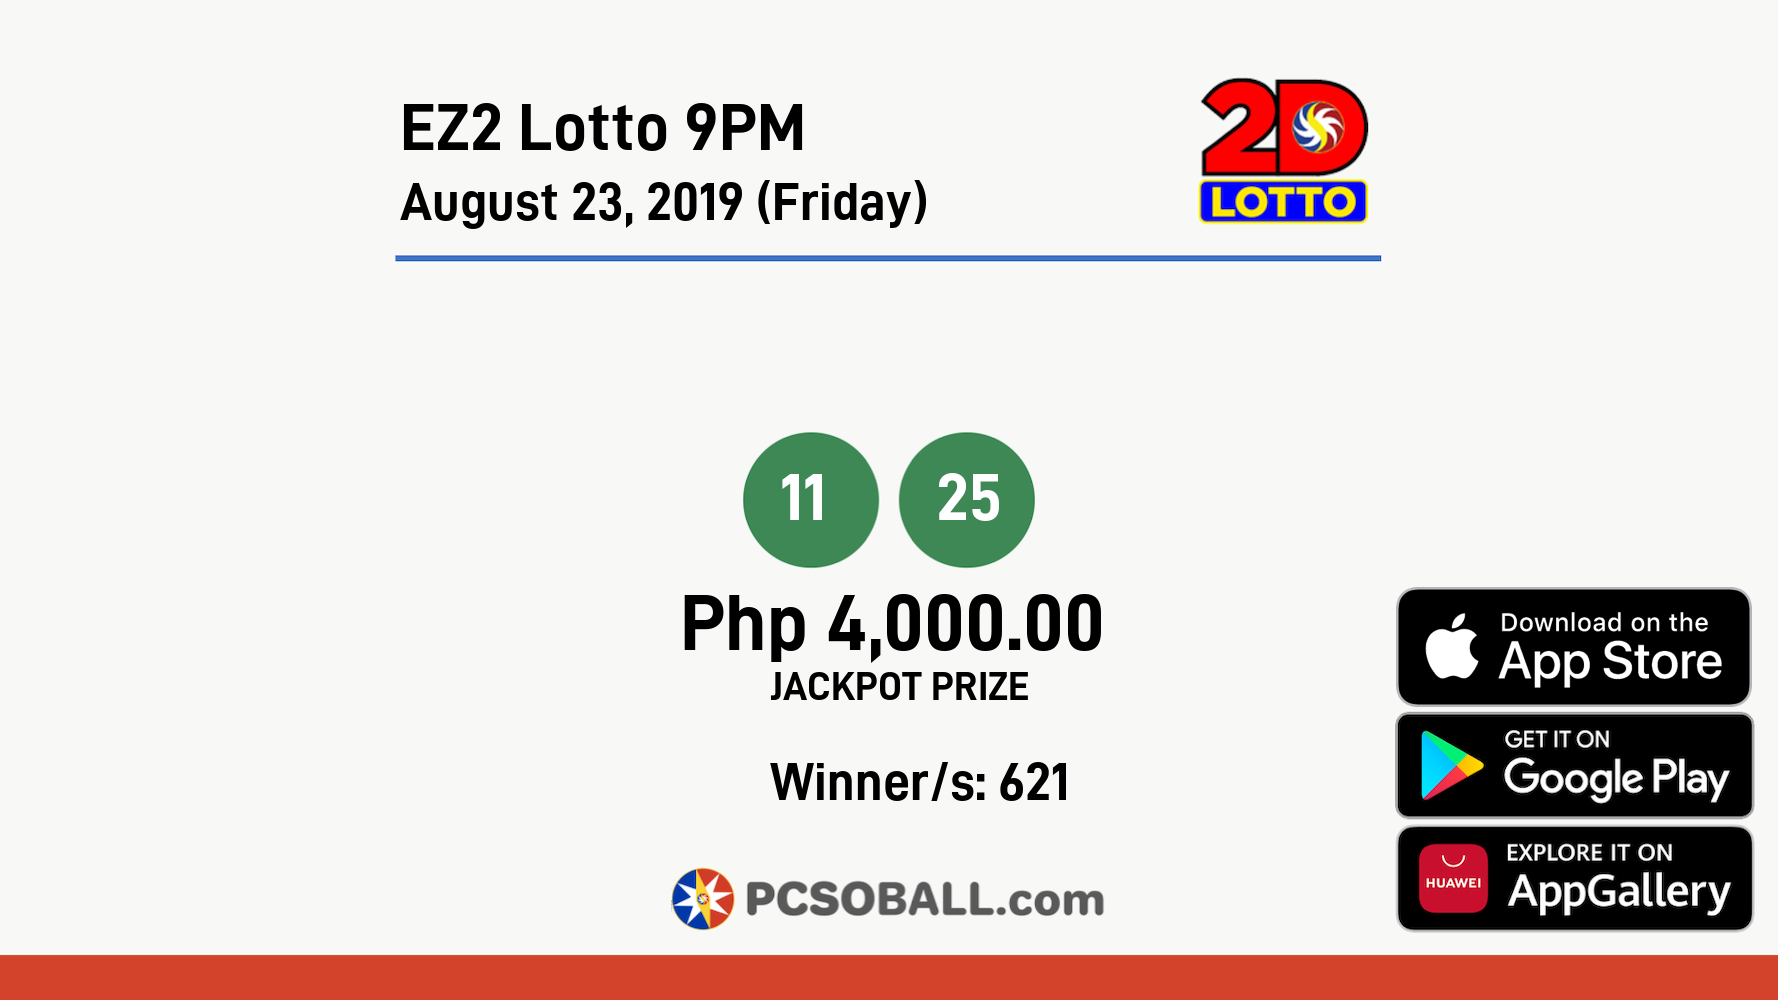 EZ2 Lotto 9PM August 23, 2019 (Friday) Result